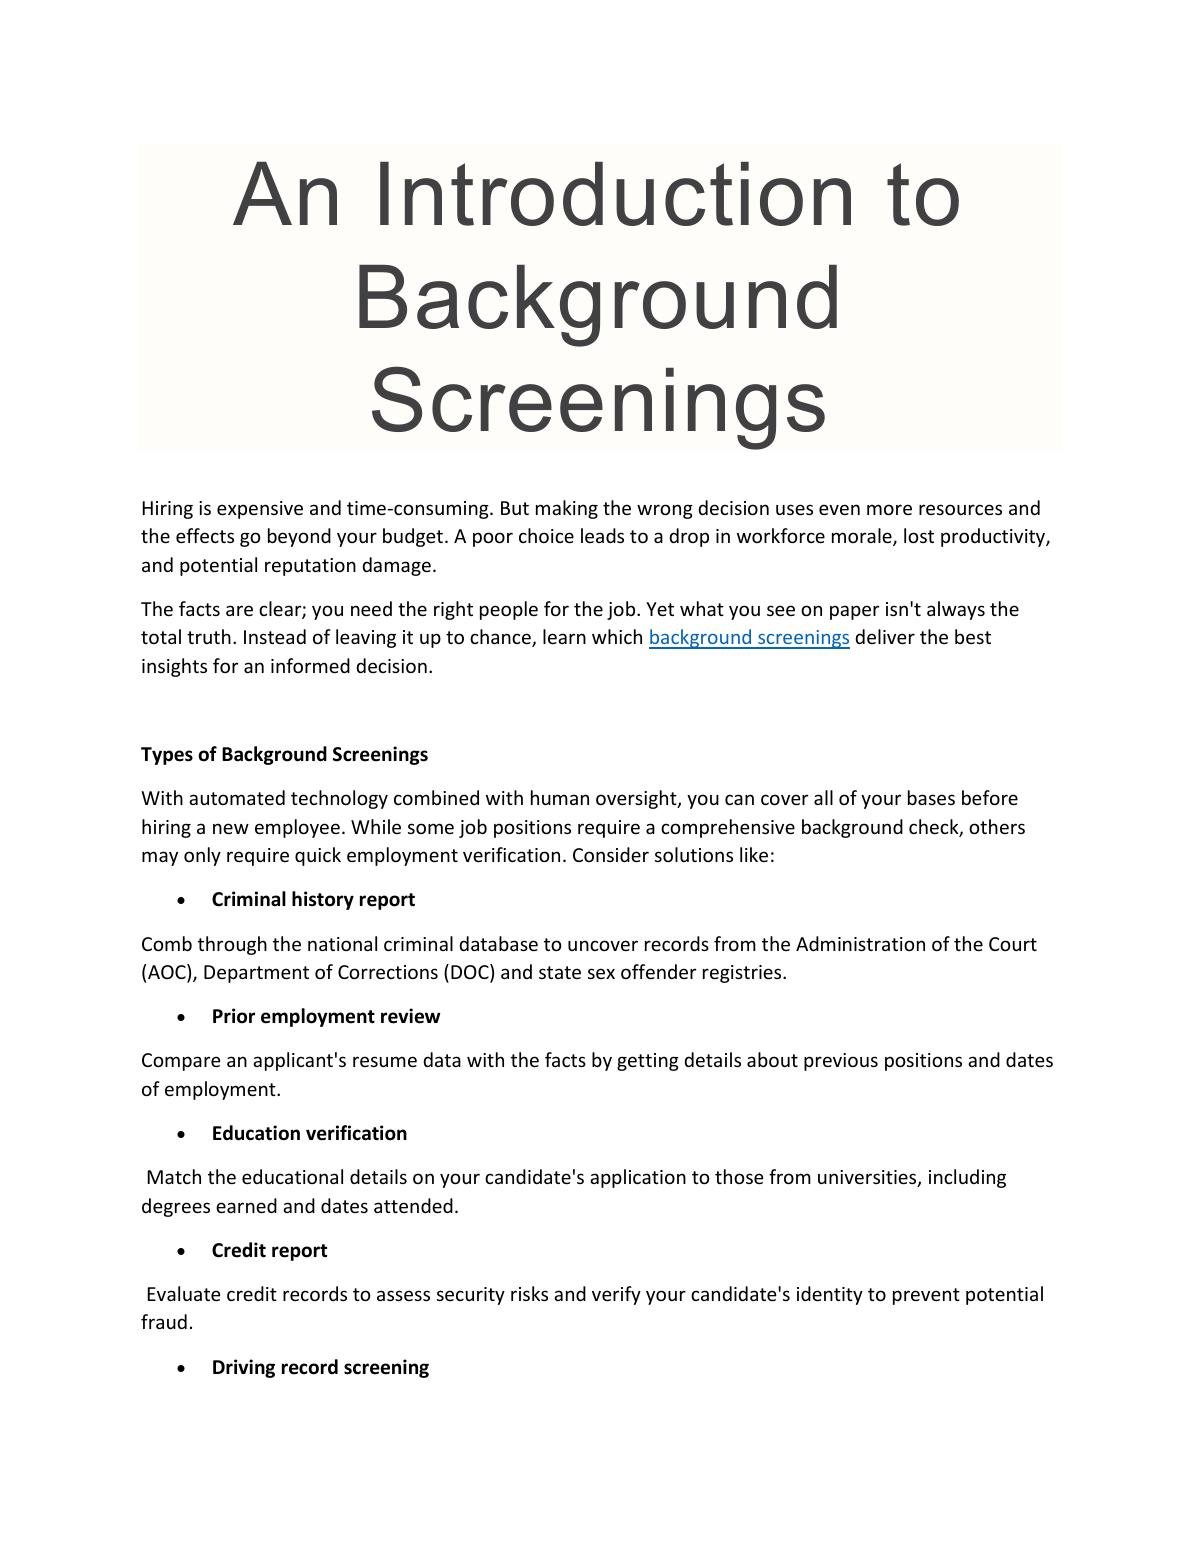 An Introduction to Background Screenings